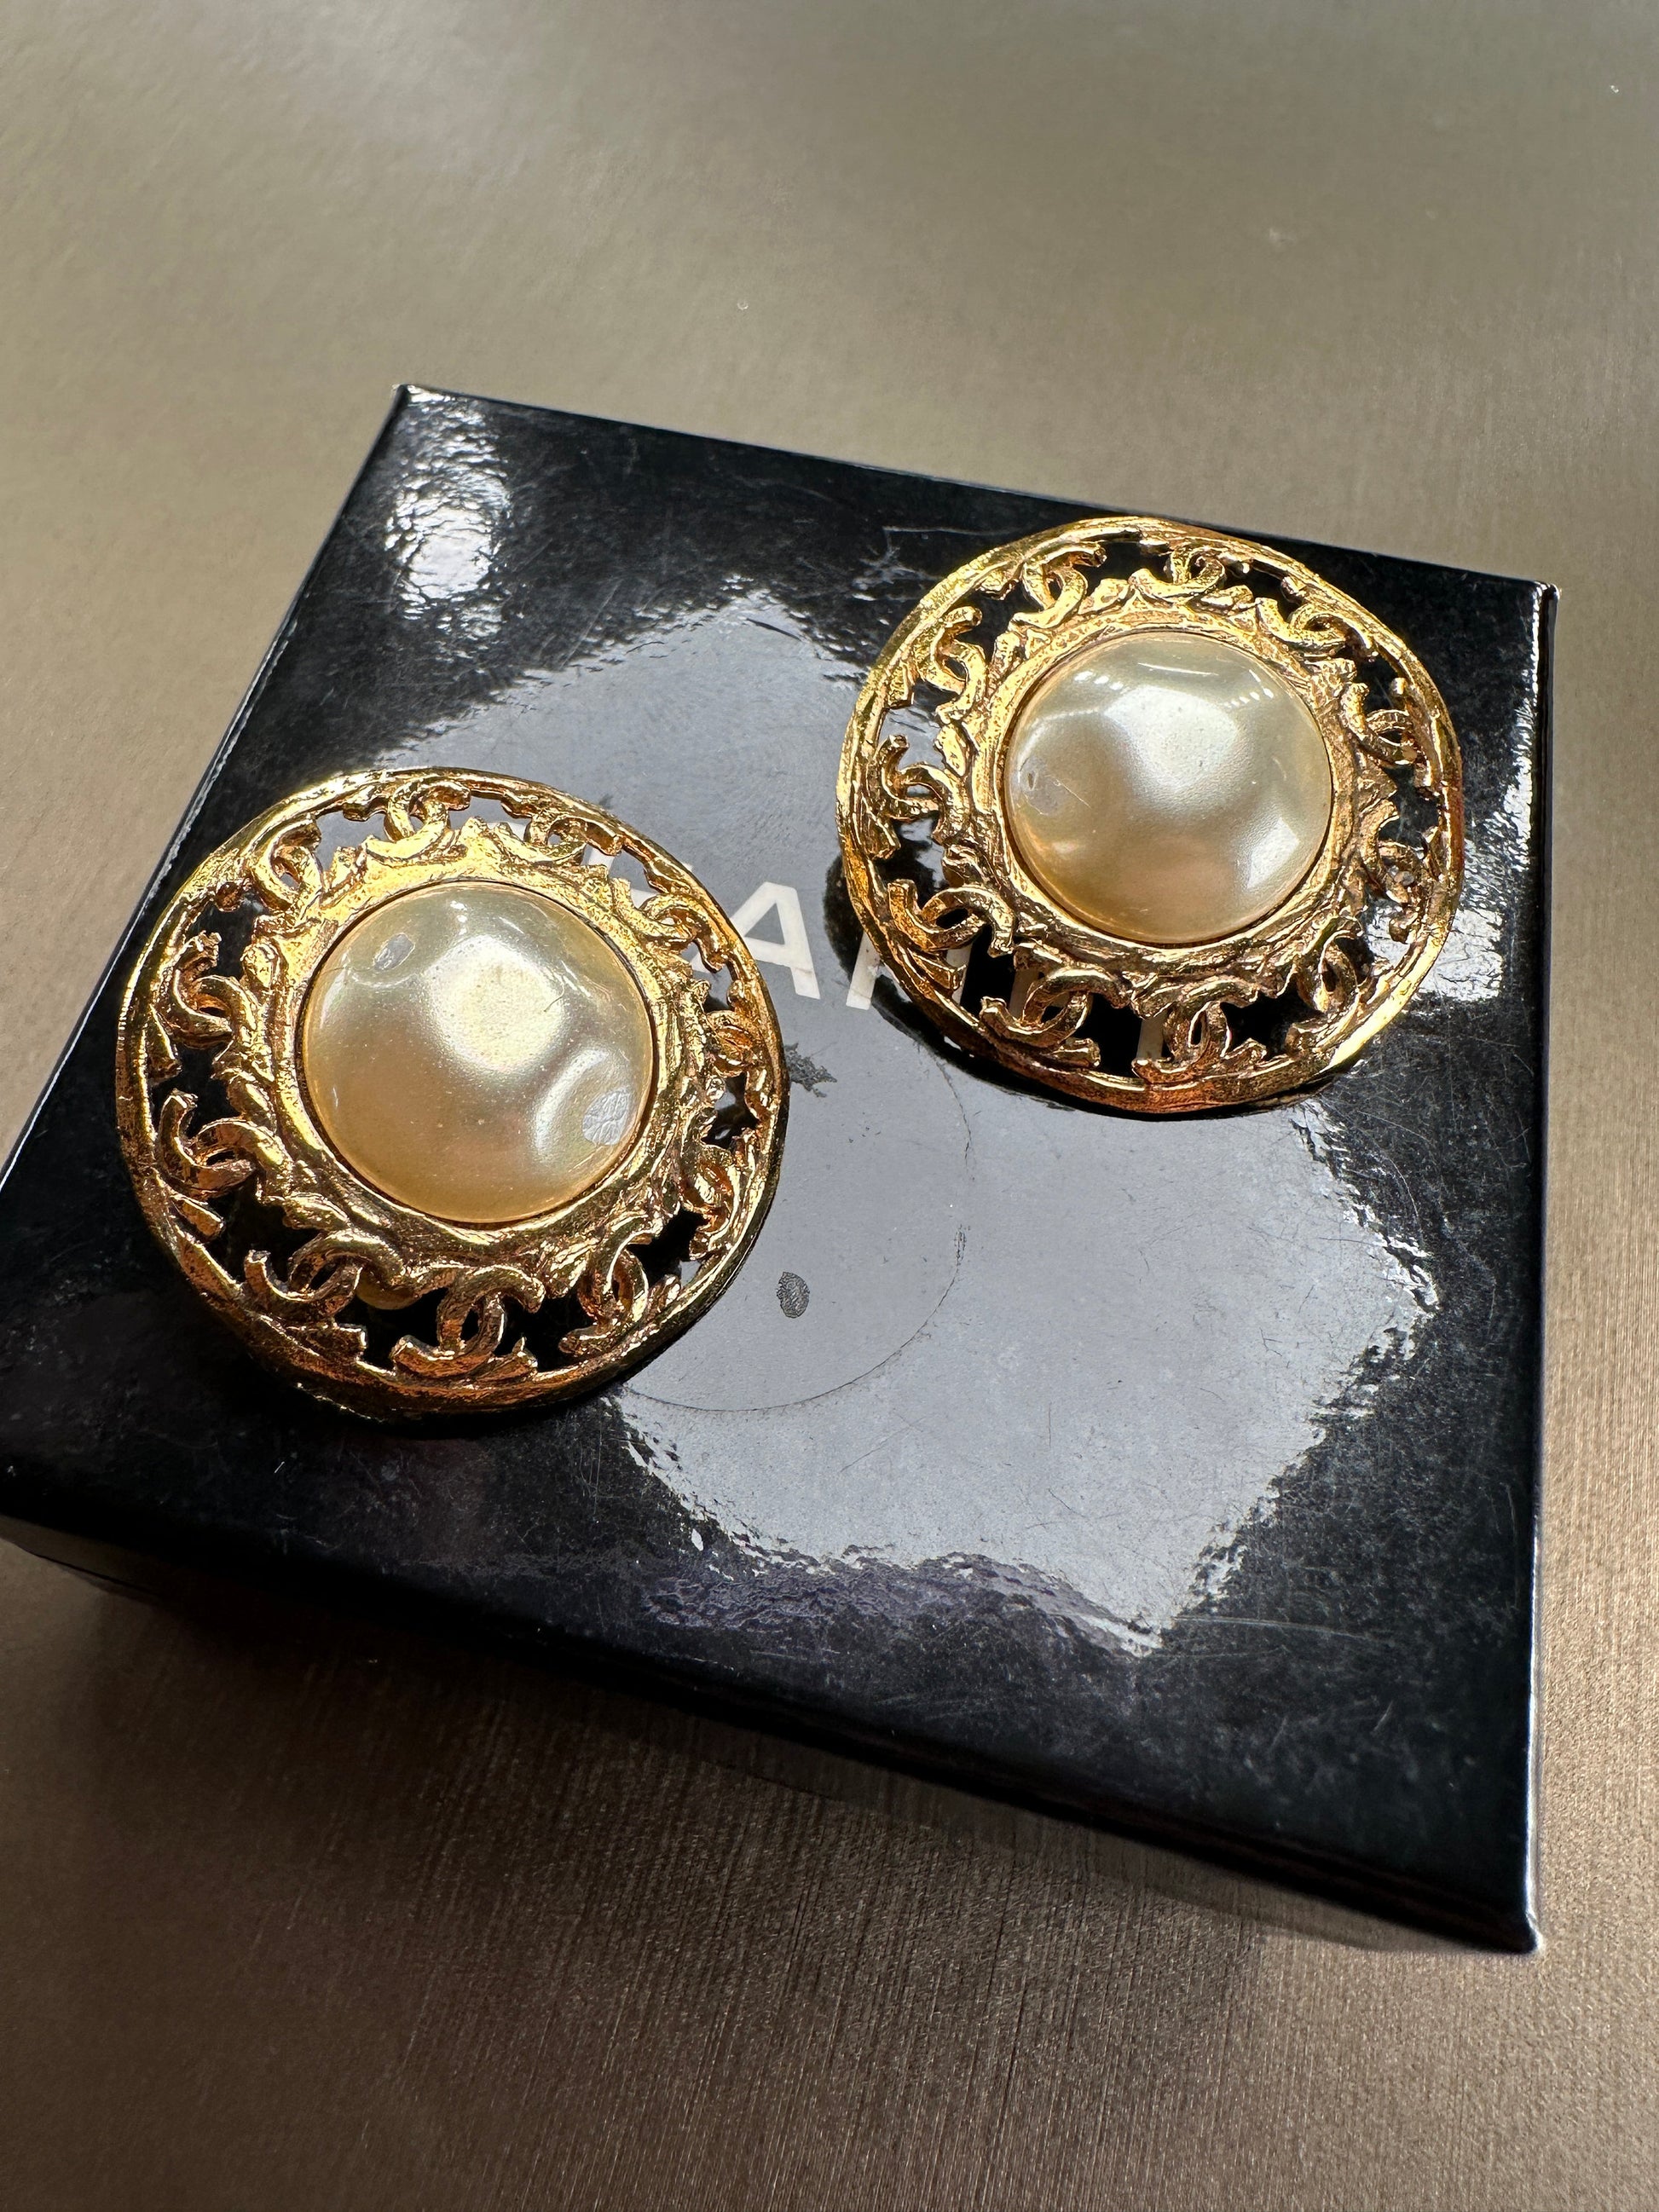 CHANEL VINTAGE 100% Authentic Genuine Faux Pearl Clip On Logo Earrings in Gold, CC Logos All around, with Box, 1984-1992, Made in France